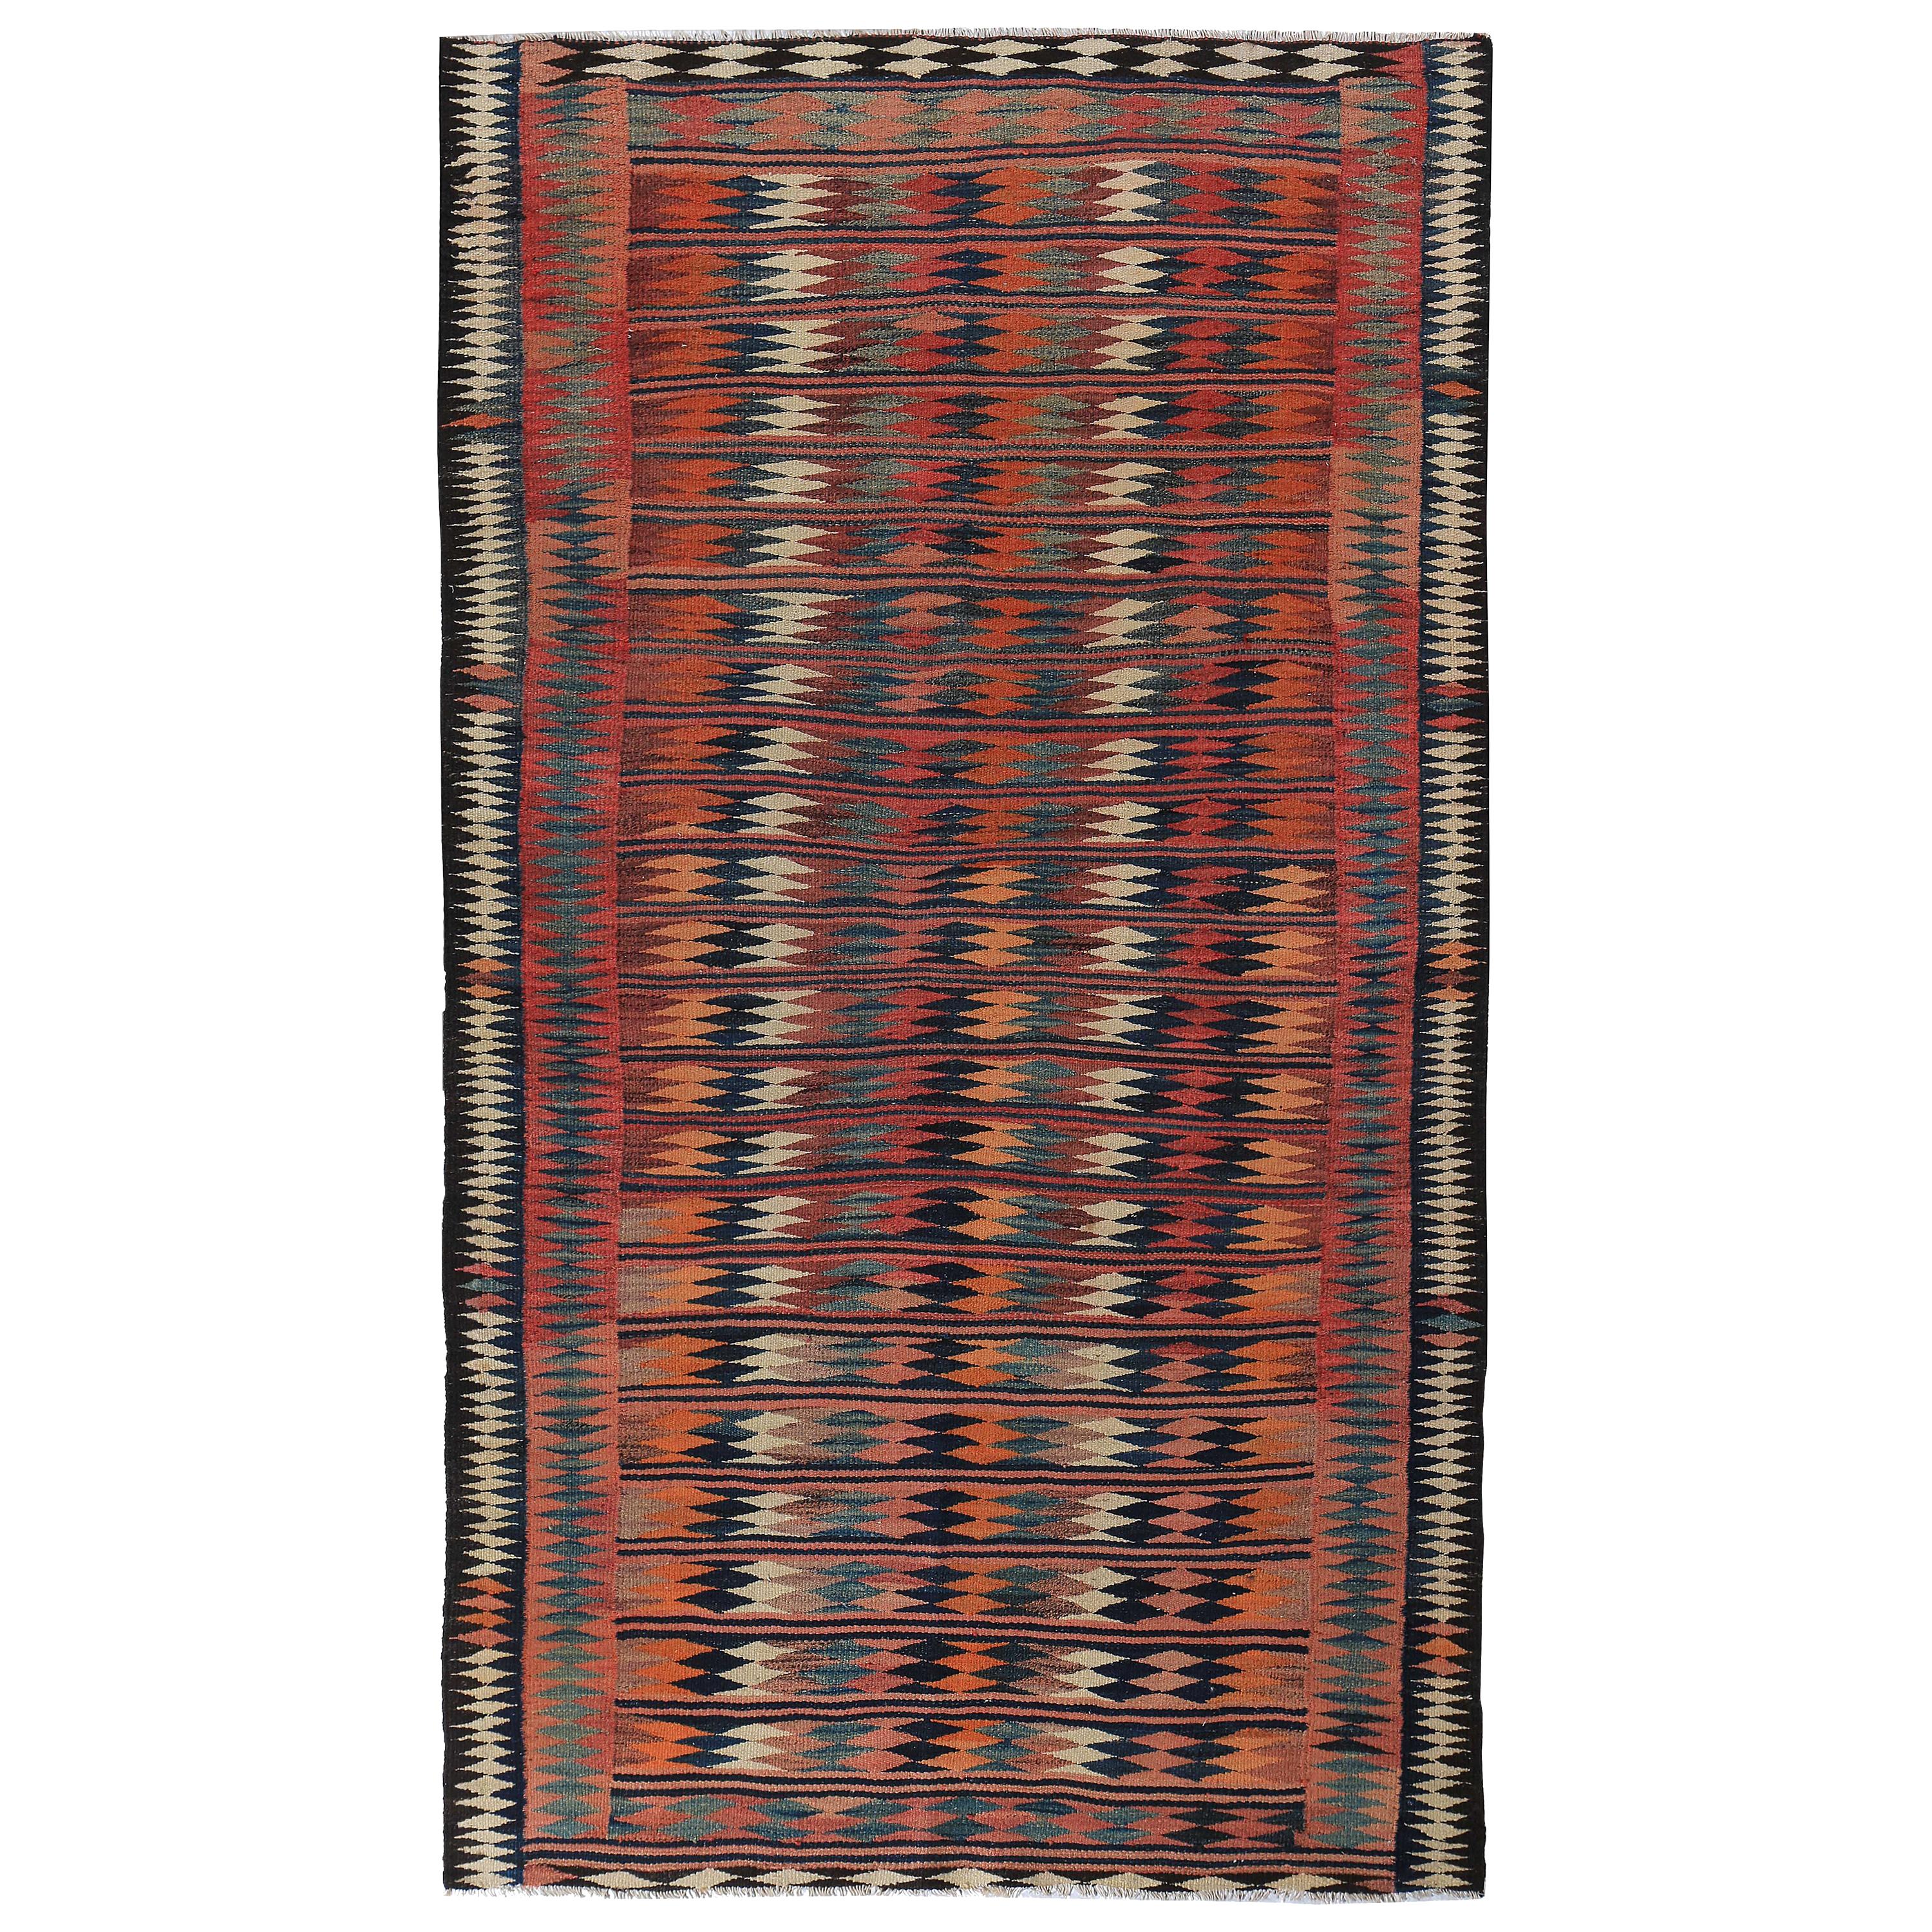 New Turkish Kilim Rug with Colorful Geometric Patterns on Black Field For Sale